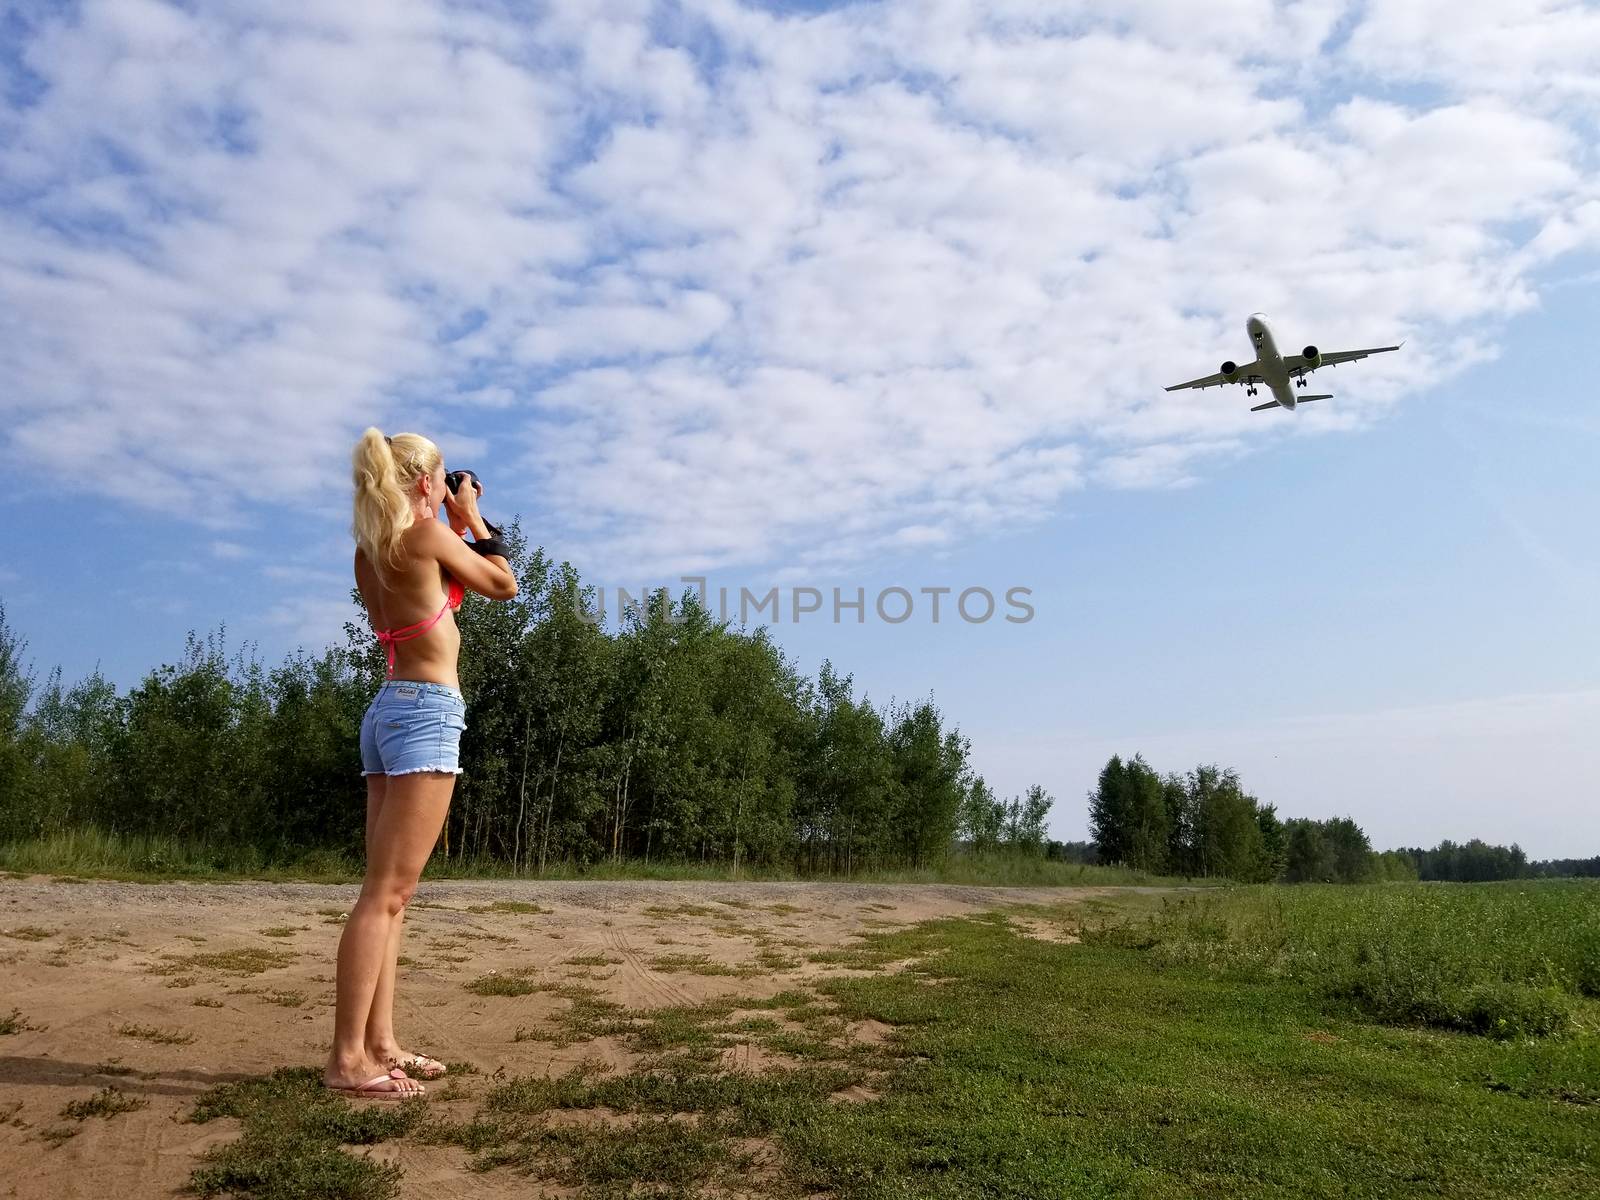 Blonde girl with long hair takes pictures of a plane flying over her on a cloudy sky background.